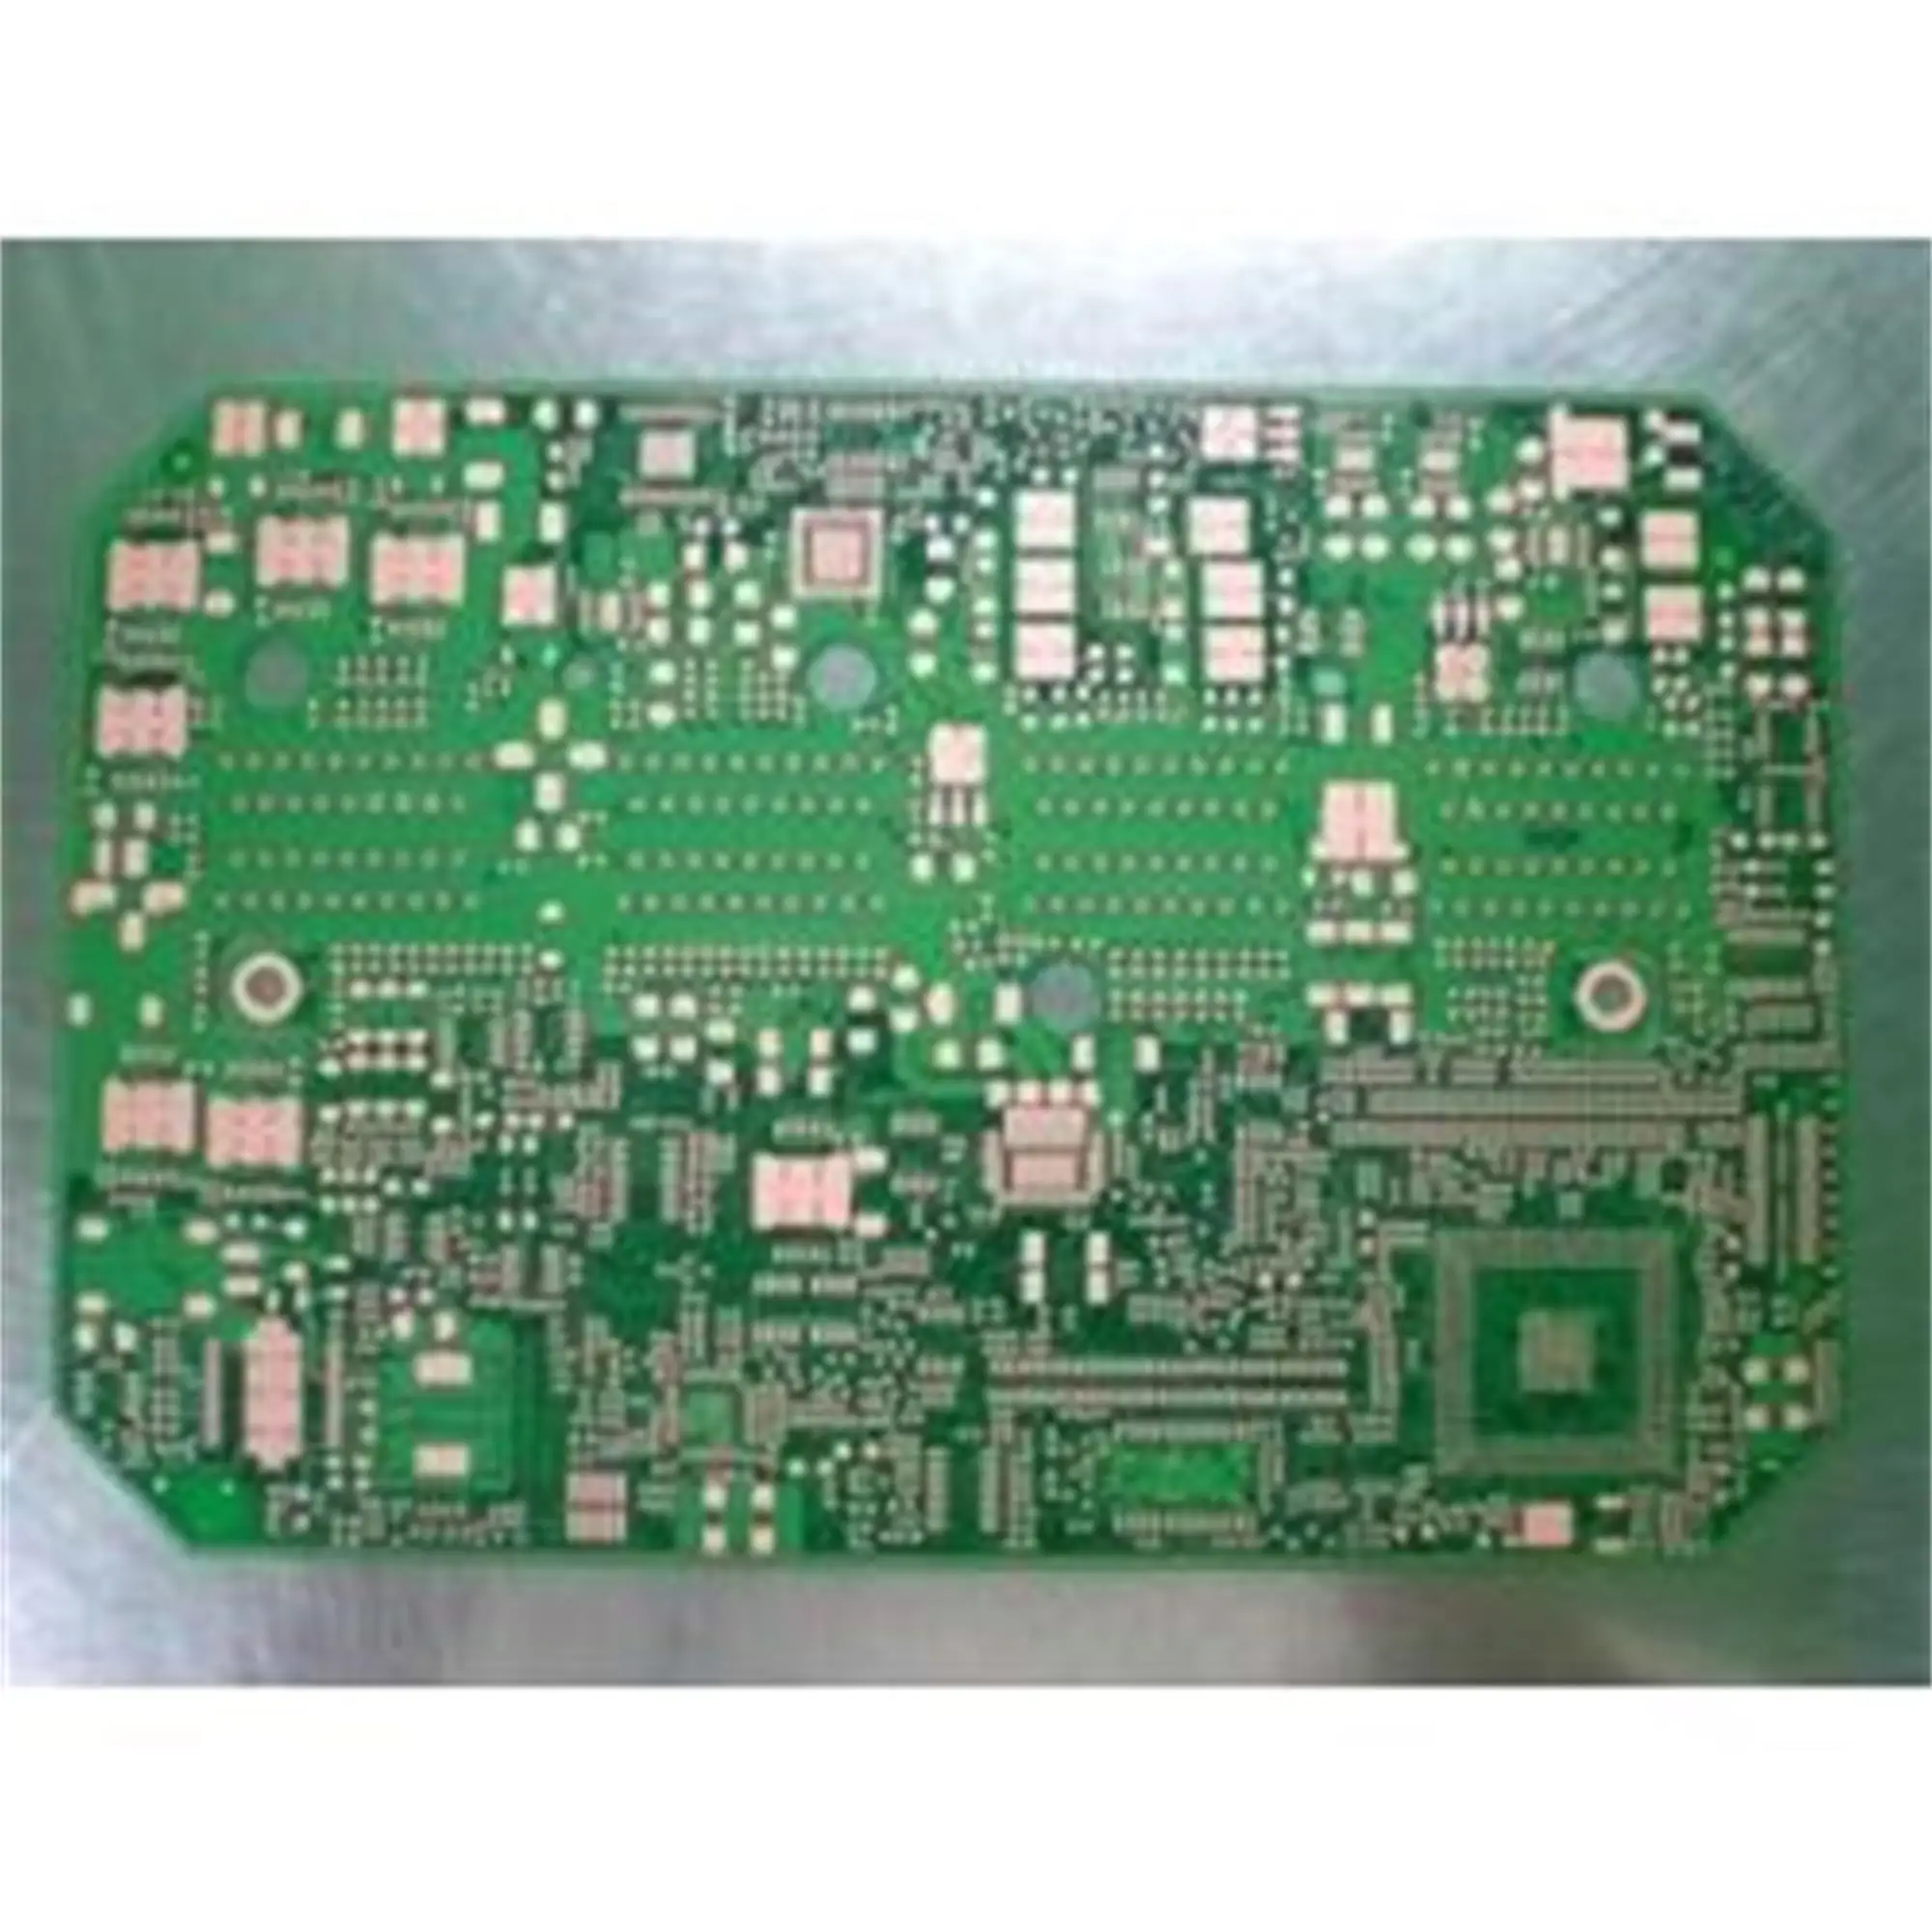 

ShenZhen PCB factory 6 Multilayer PCBs for WIFI boards with ENIG finish Min Au 2micro inches BGA produce impedance control.